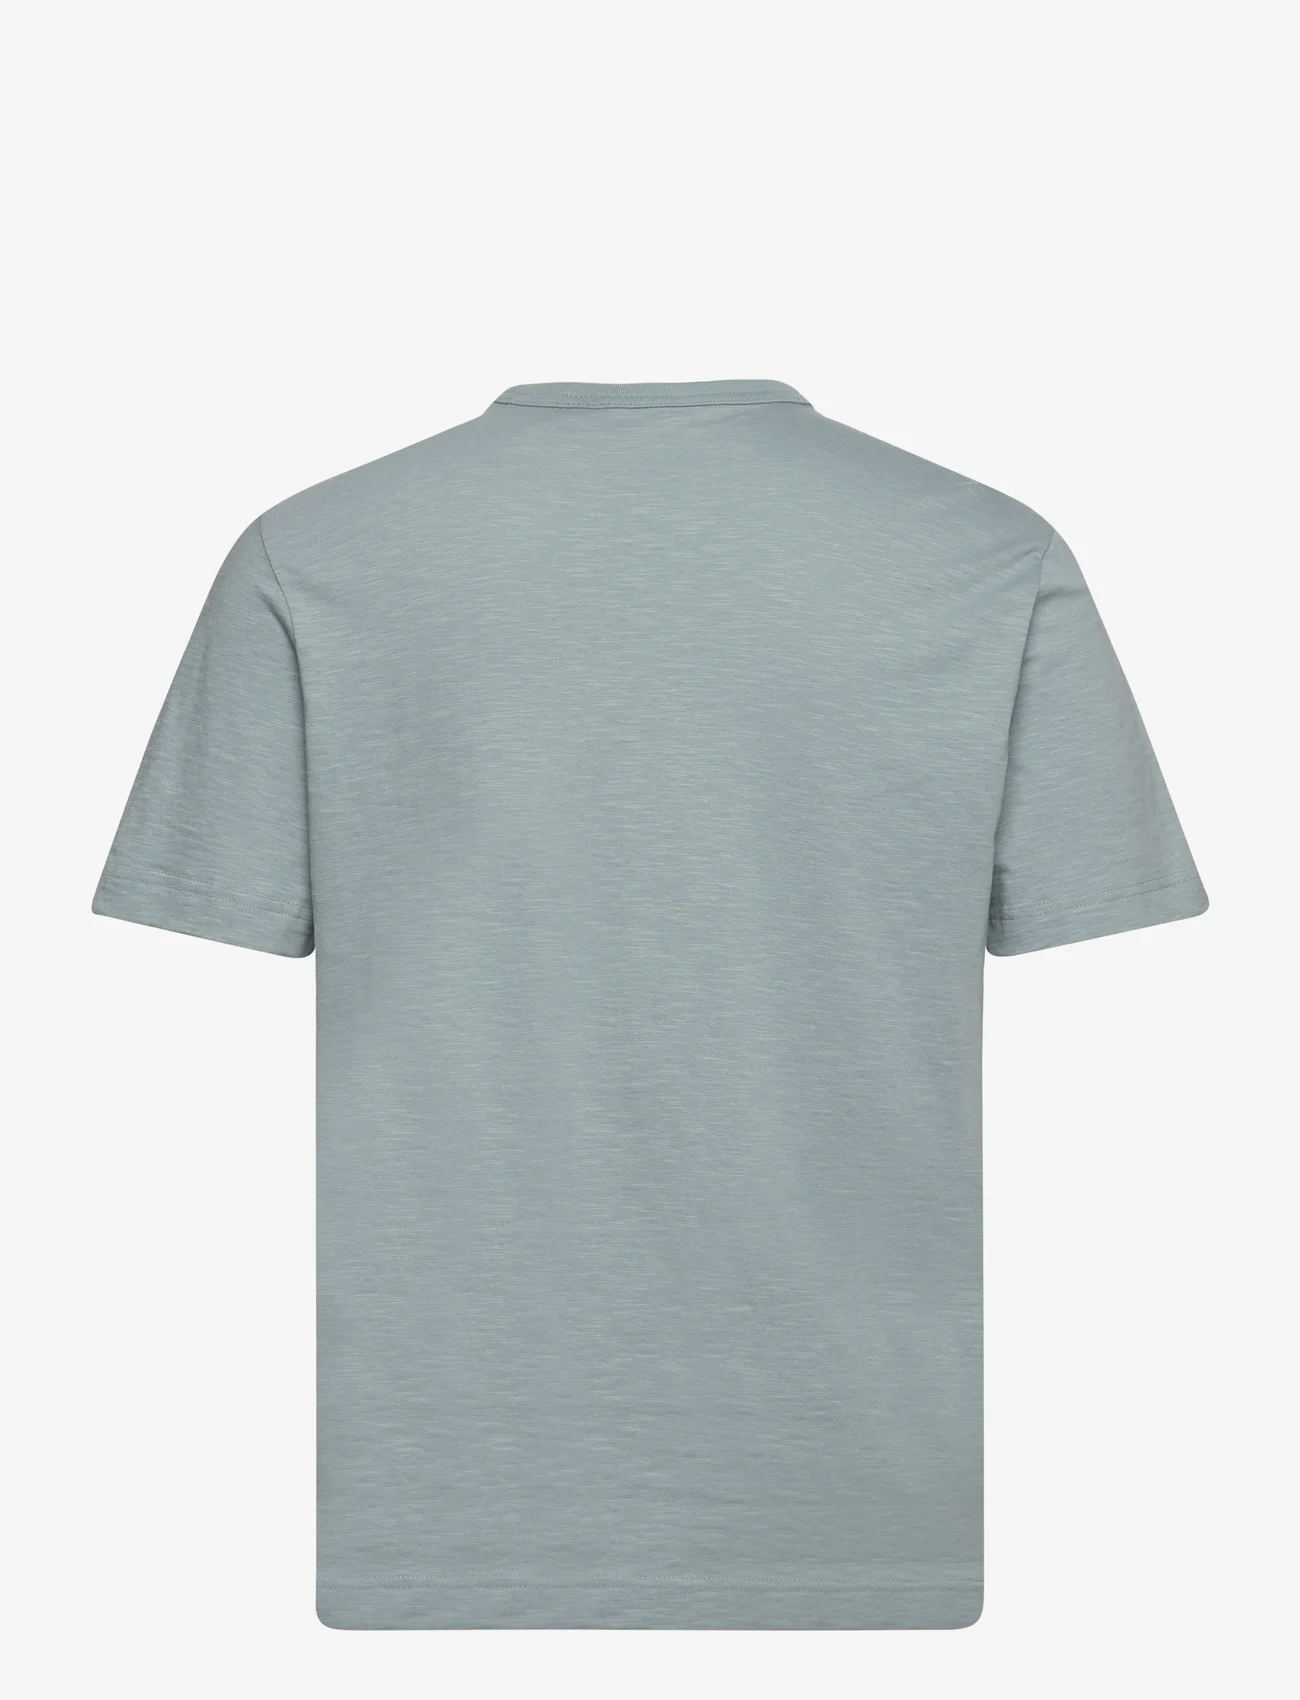 Tom Tailor - printed t-shirt - lowest prices - grey mint - 1